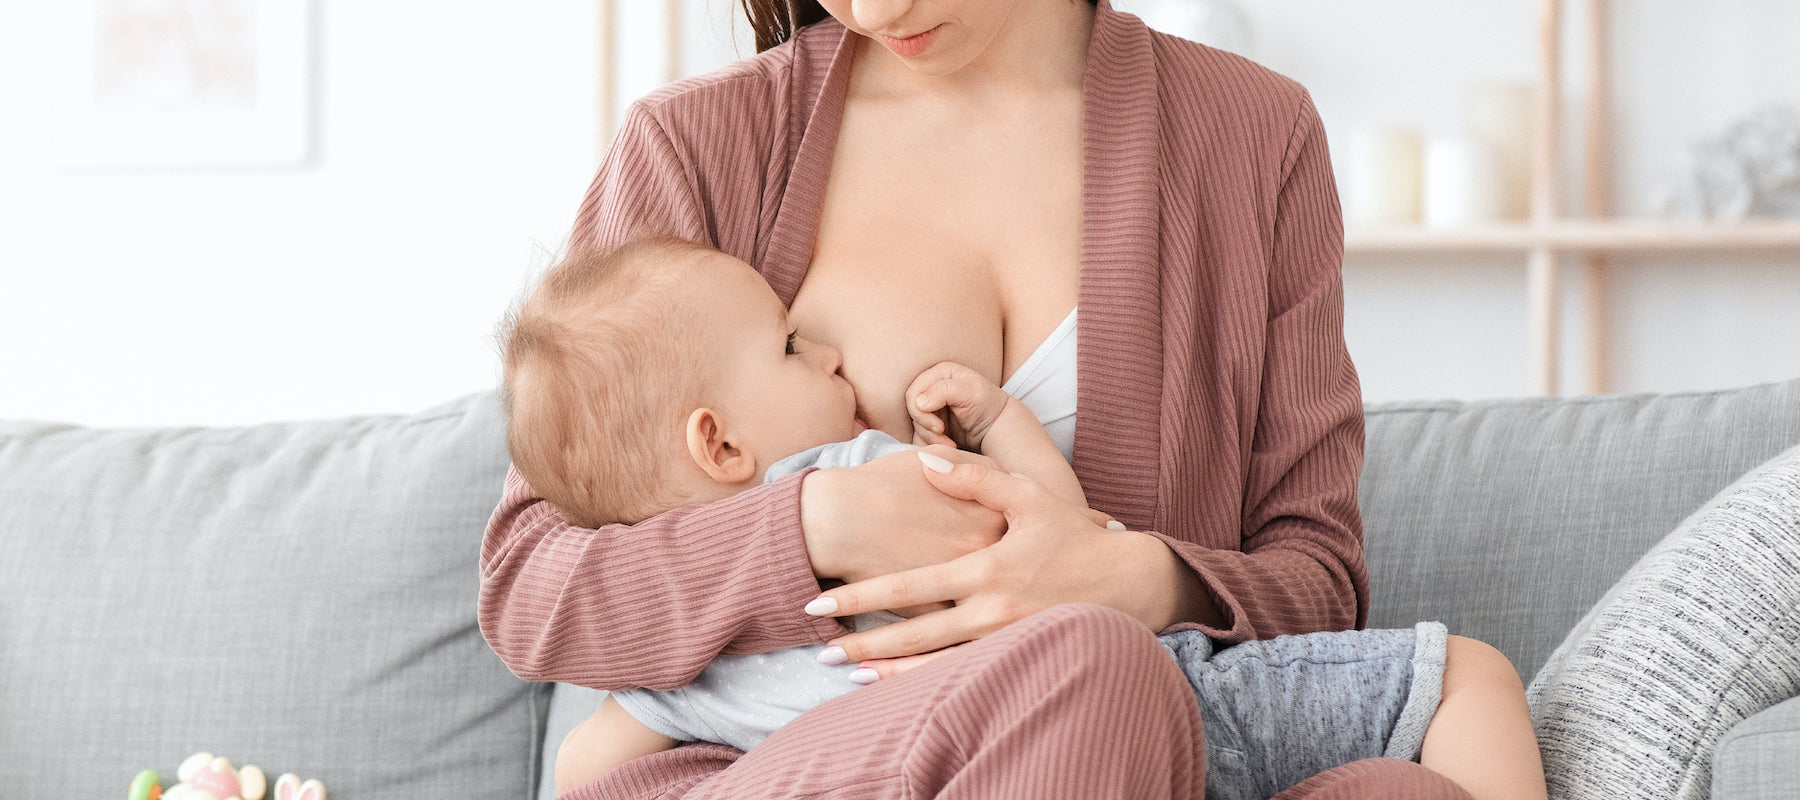 Everything About Breastfeeding and Latching